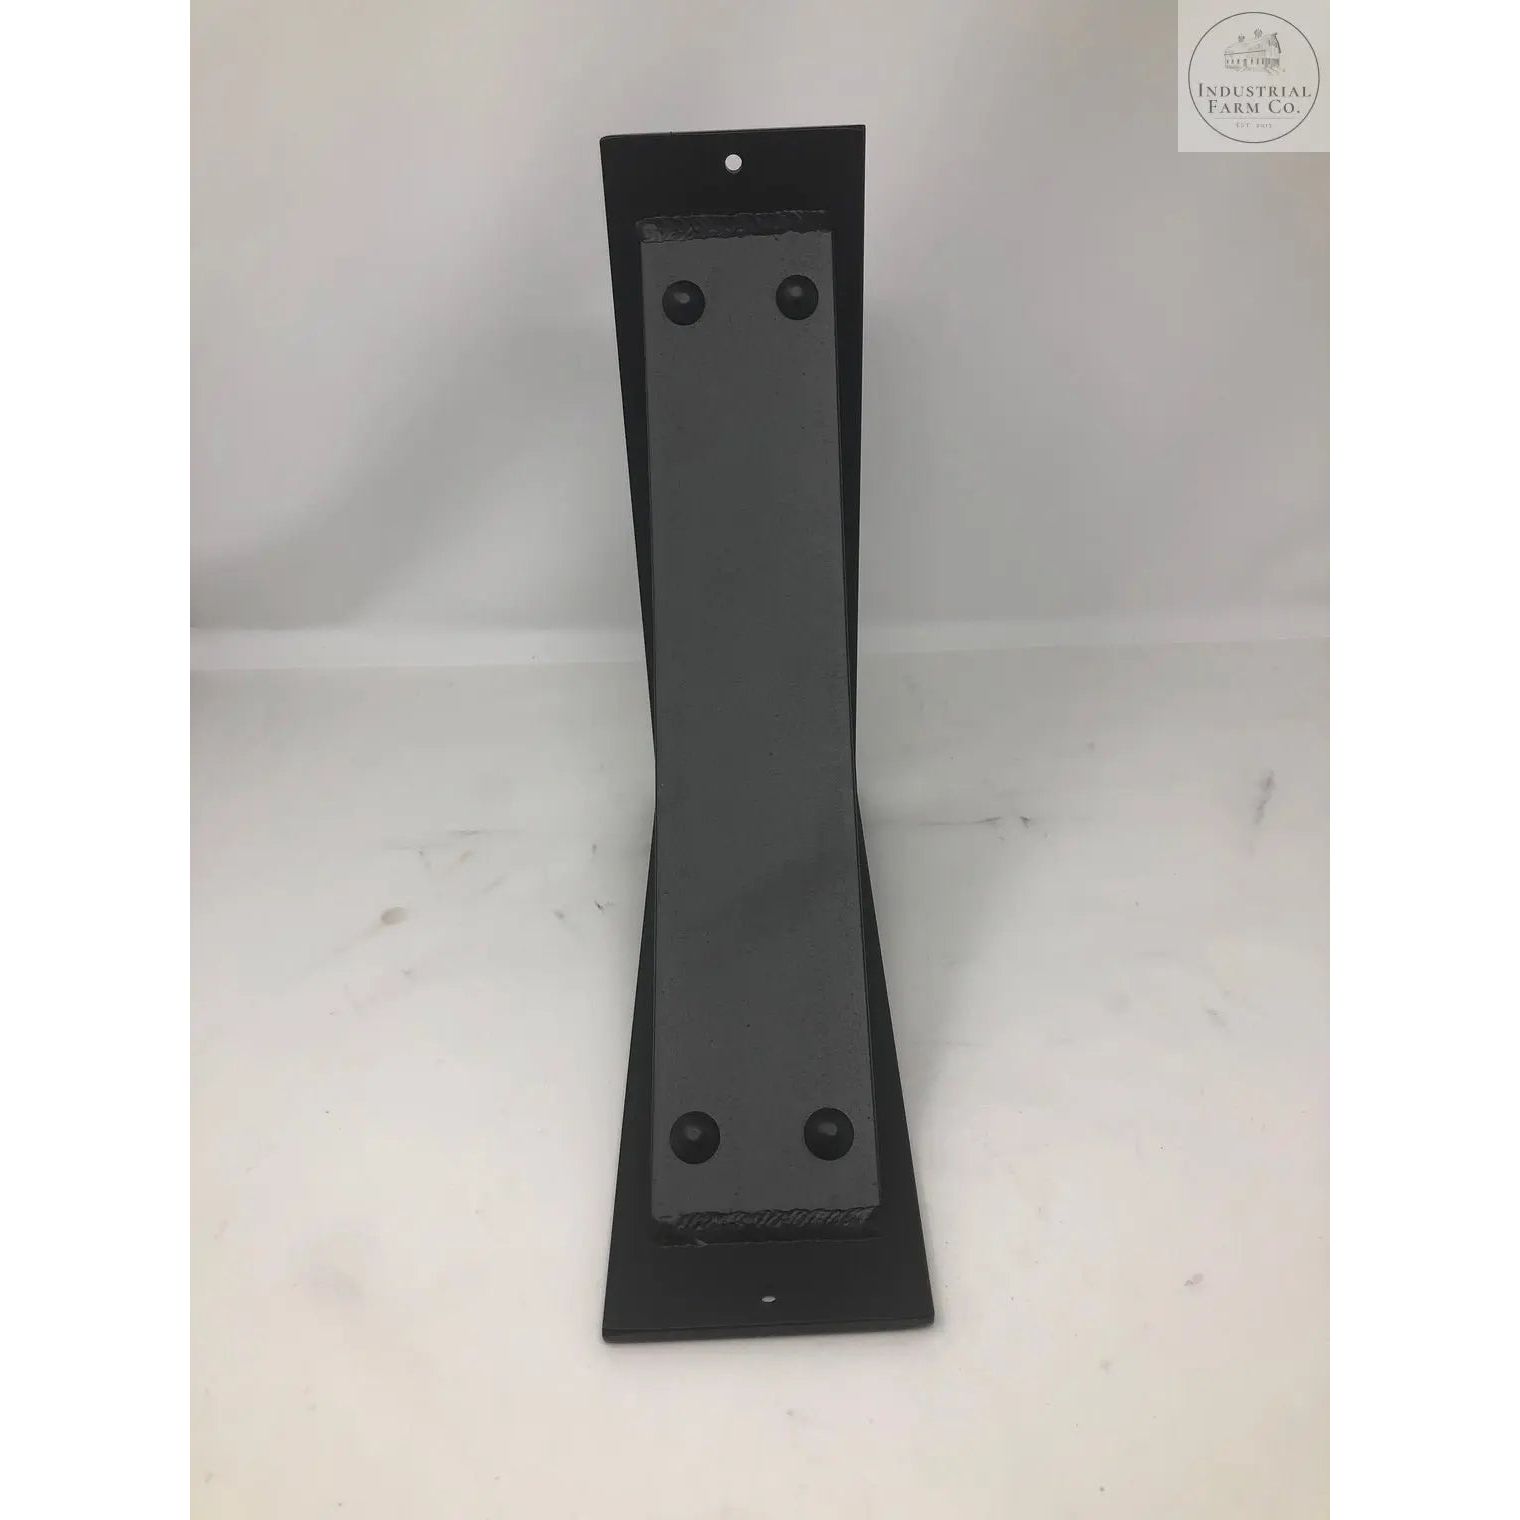 The Utica Support - Sold Individually Brackets/Corbels 6" Depth x 6" Wall Mount Length Finish Copper Powder Coat | Industrial Farm Co